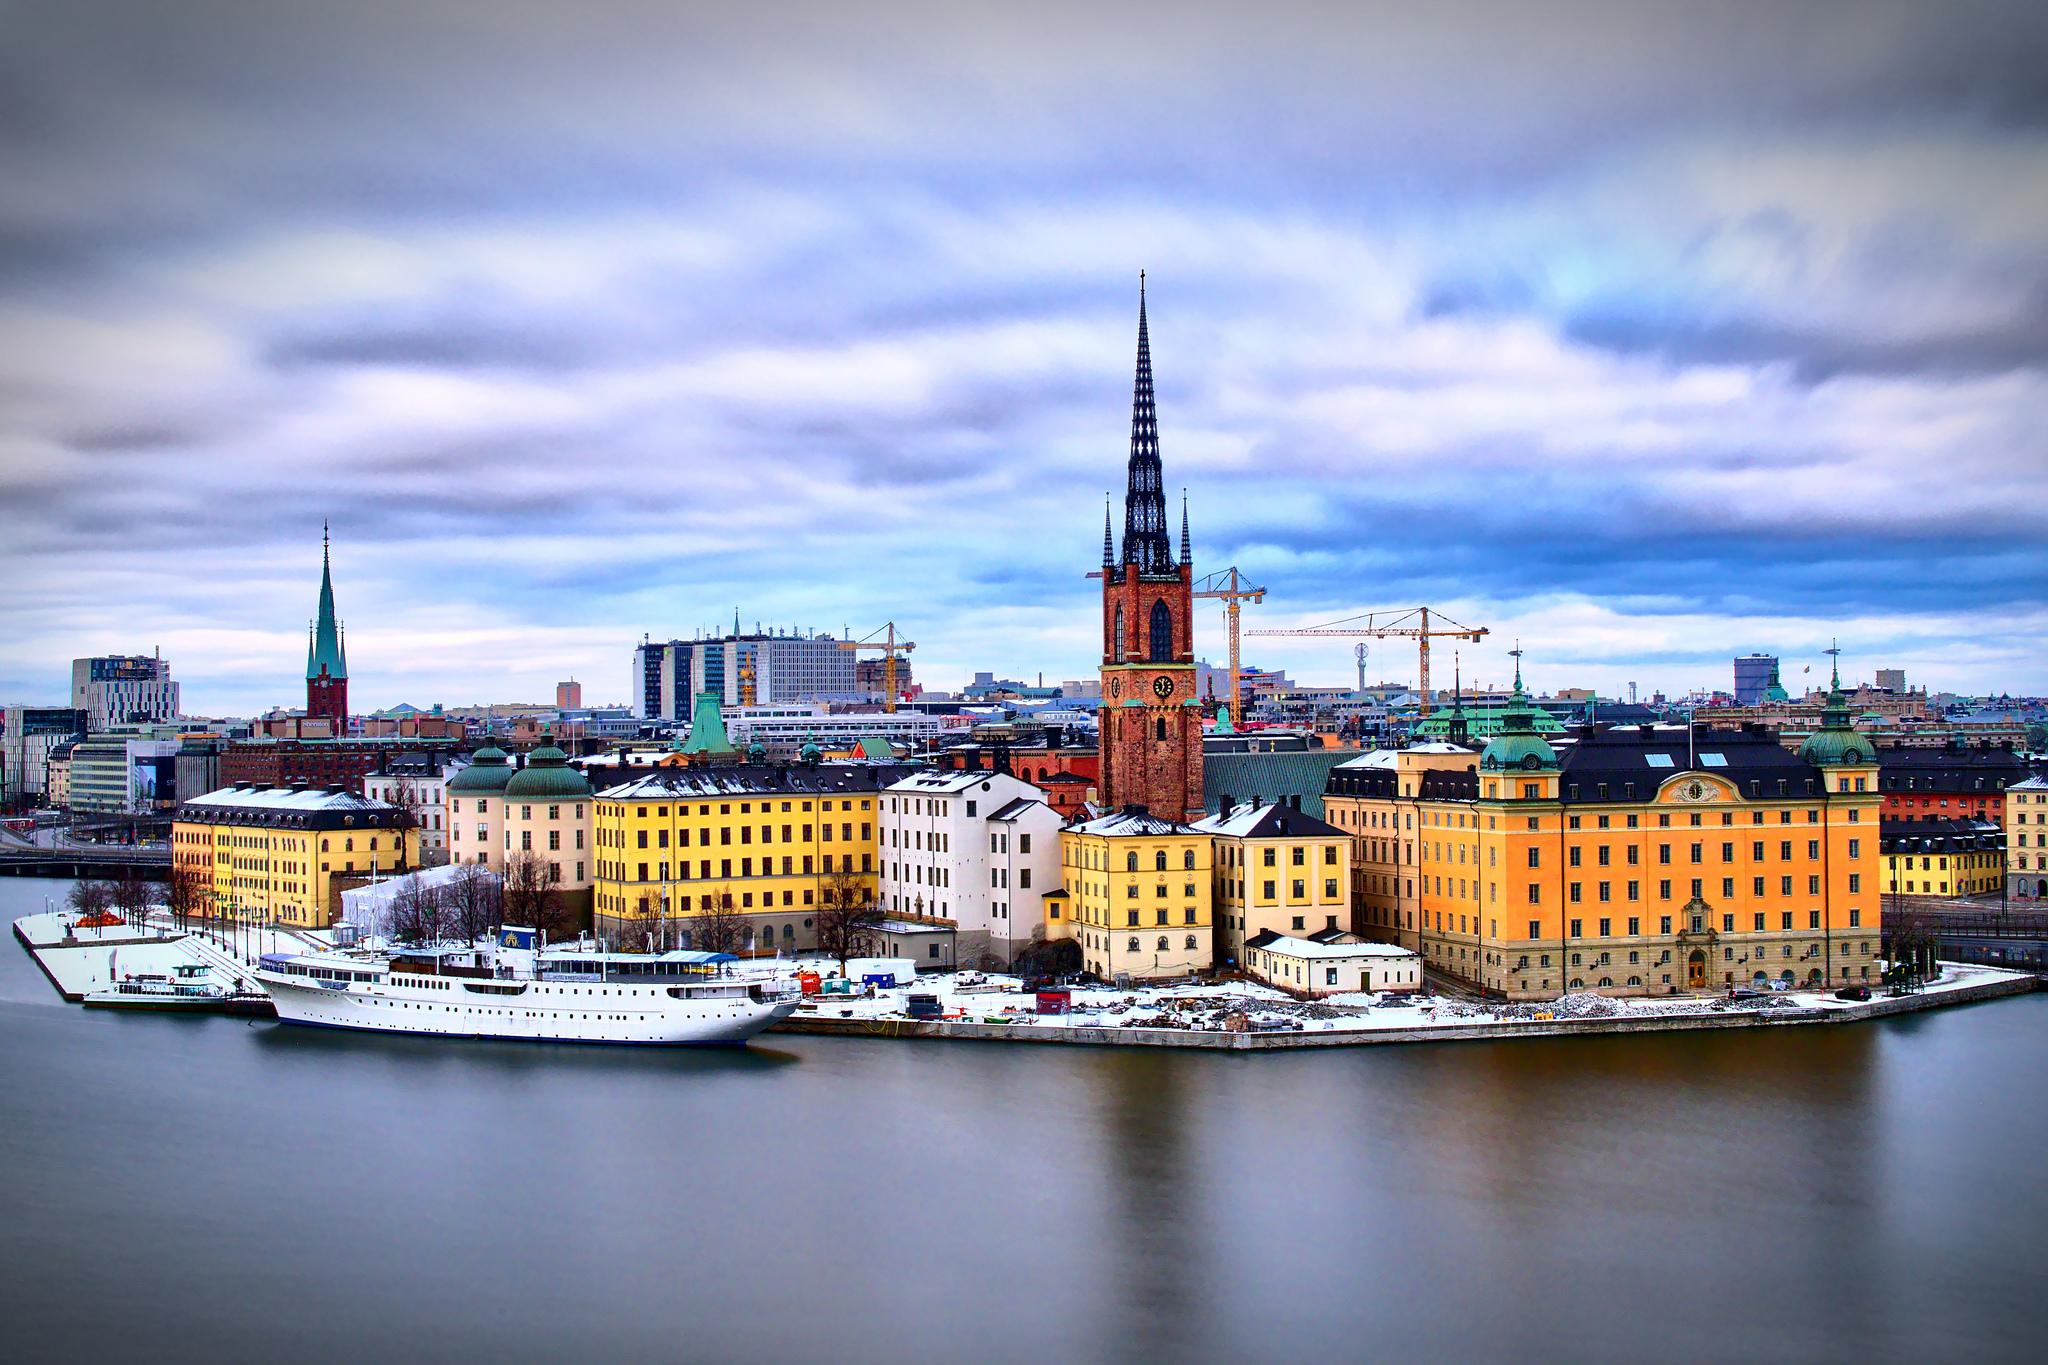 Sweden is no stranger to topping global rankings